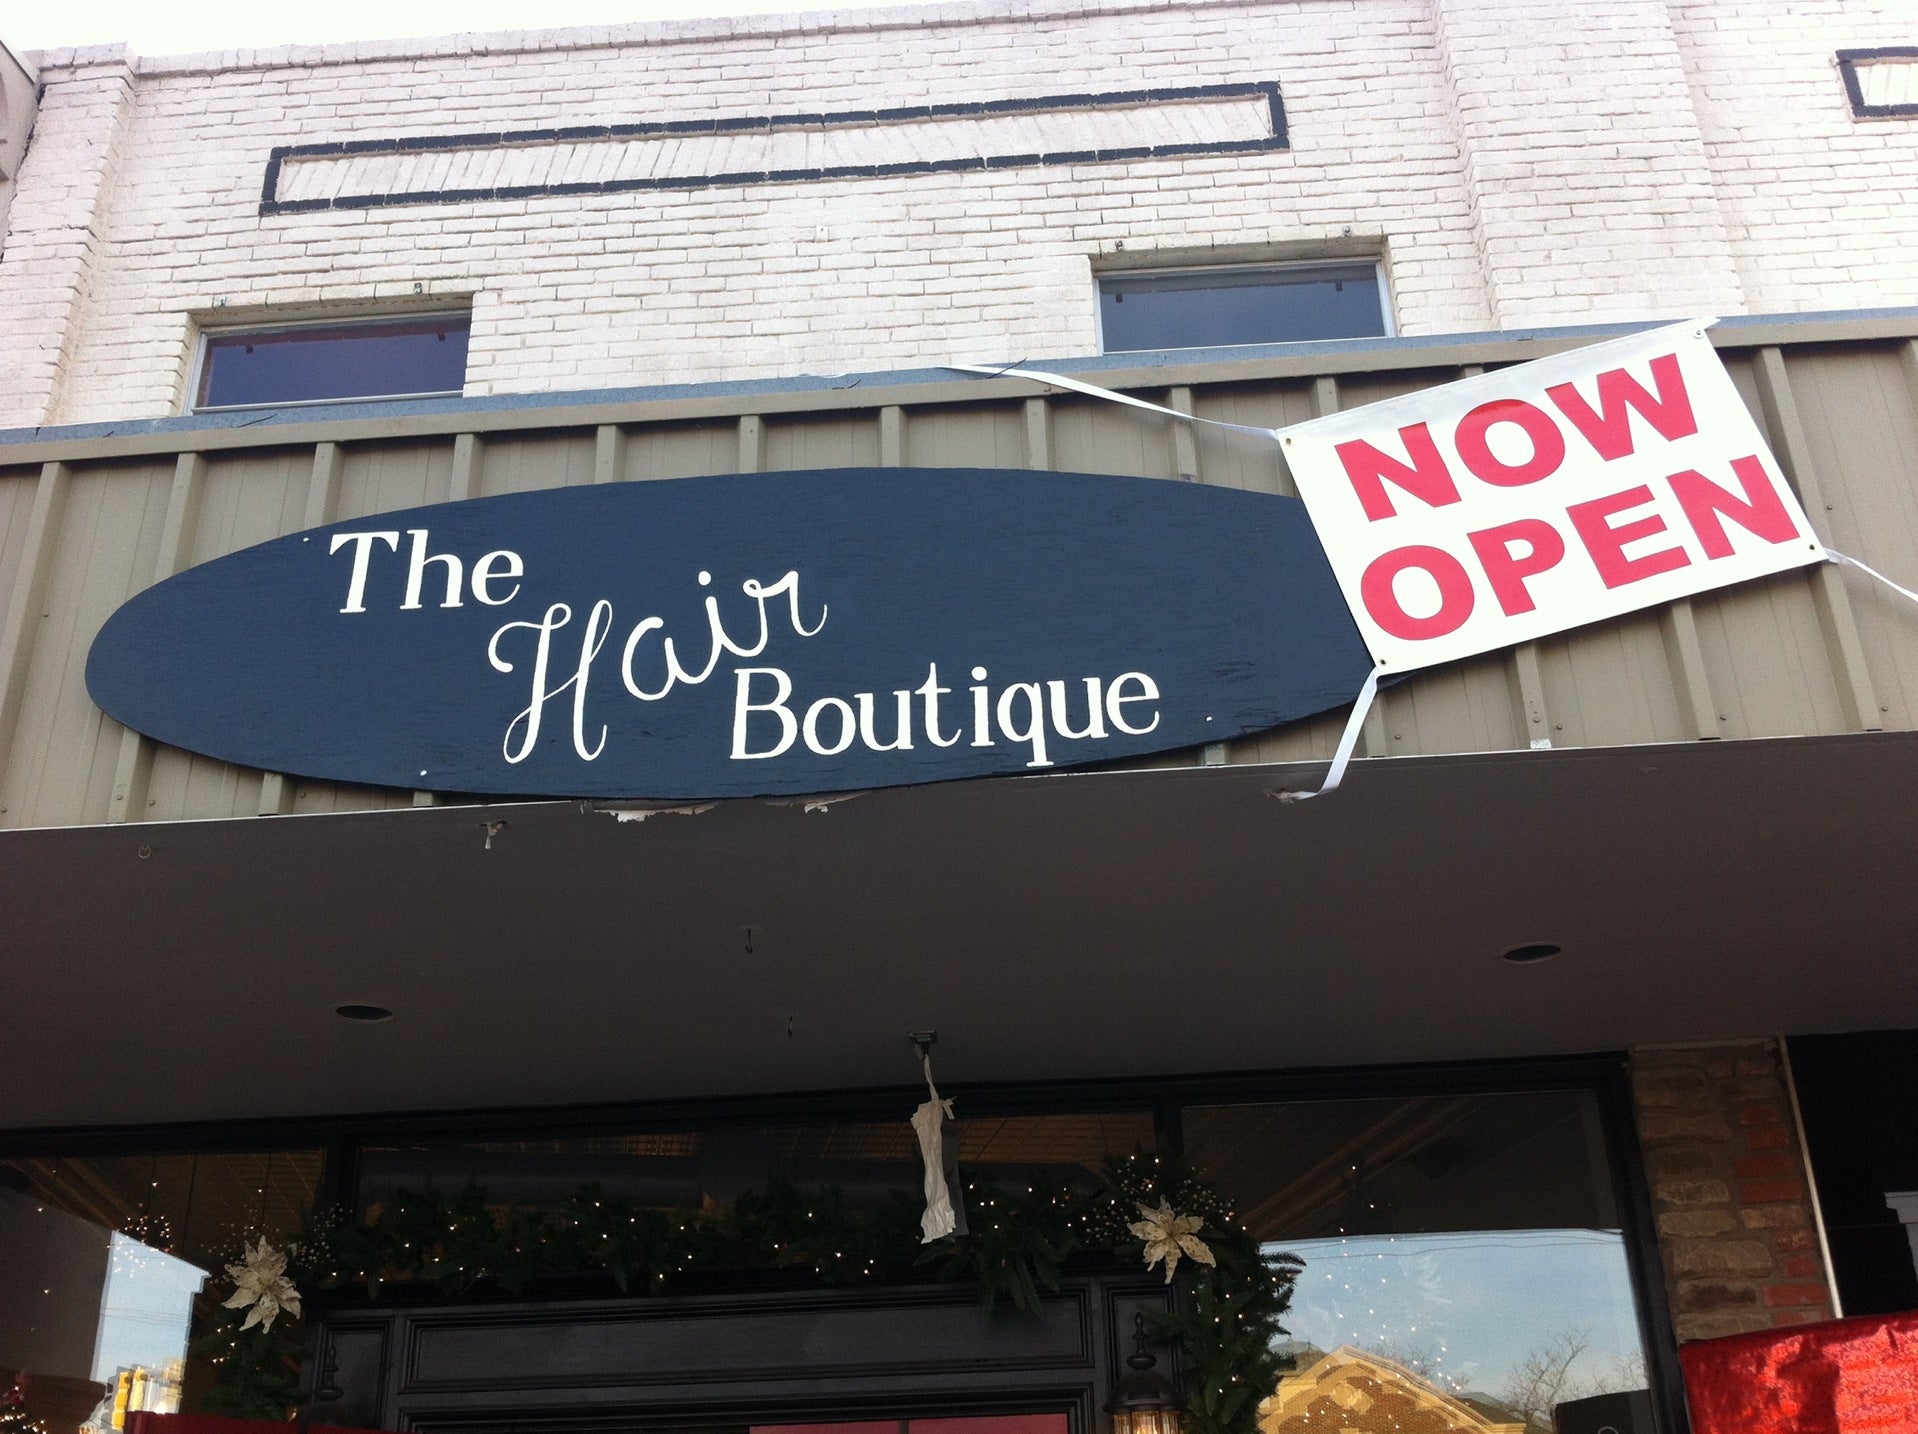 The Hair Boutique 6714 NW 39th Expy, Bethany Oklahoma 73008